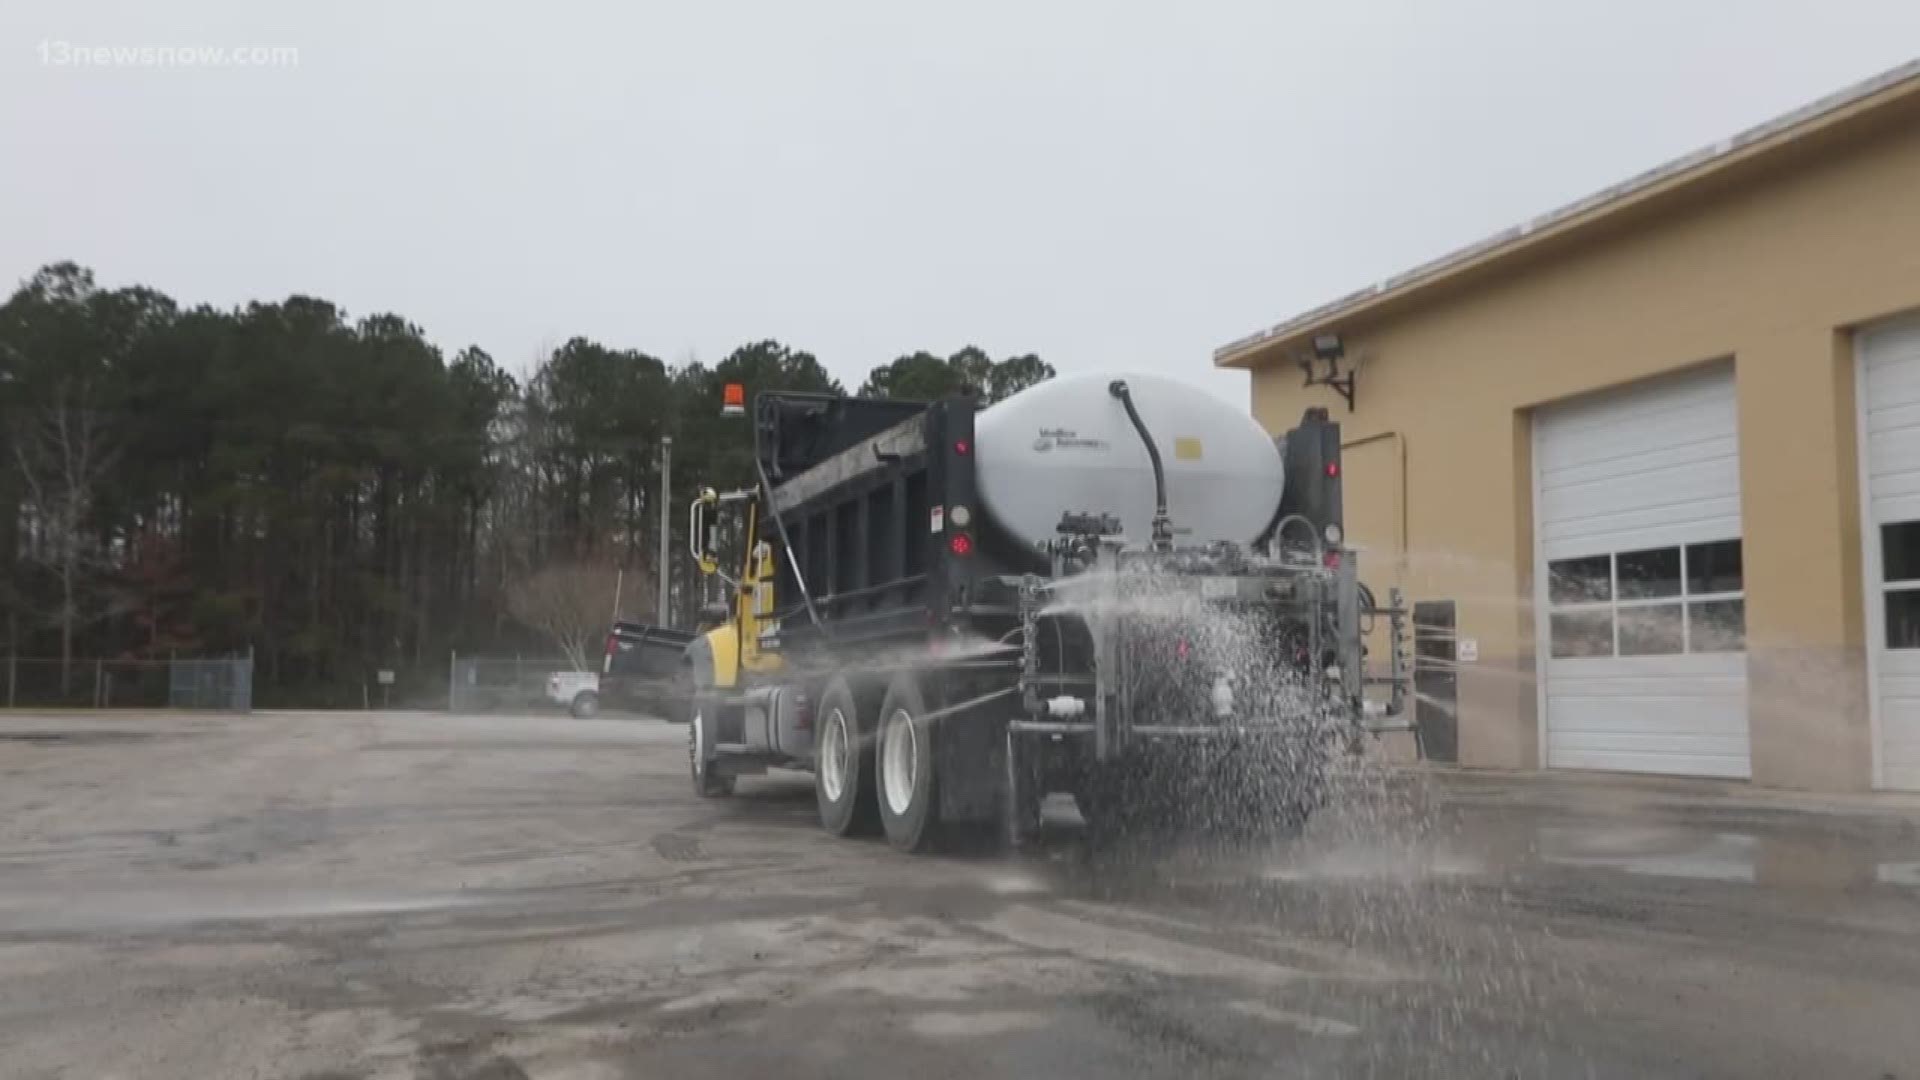 13News Now Evan Watson reported from Elizabeth City, NC where NCDOT officials prepared for heavy snowfall on Feb. 20, 2020.